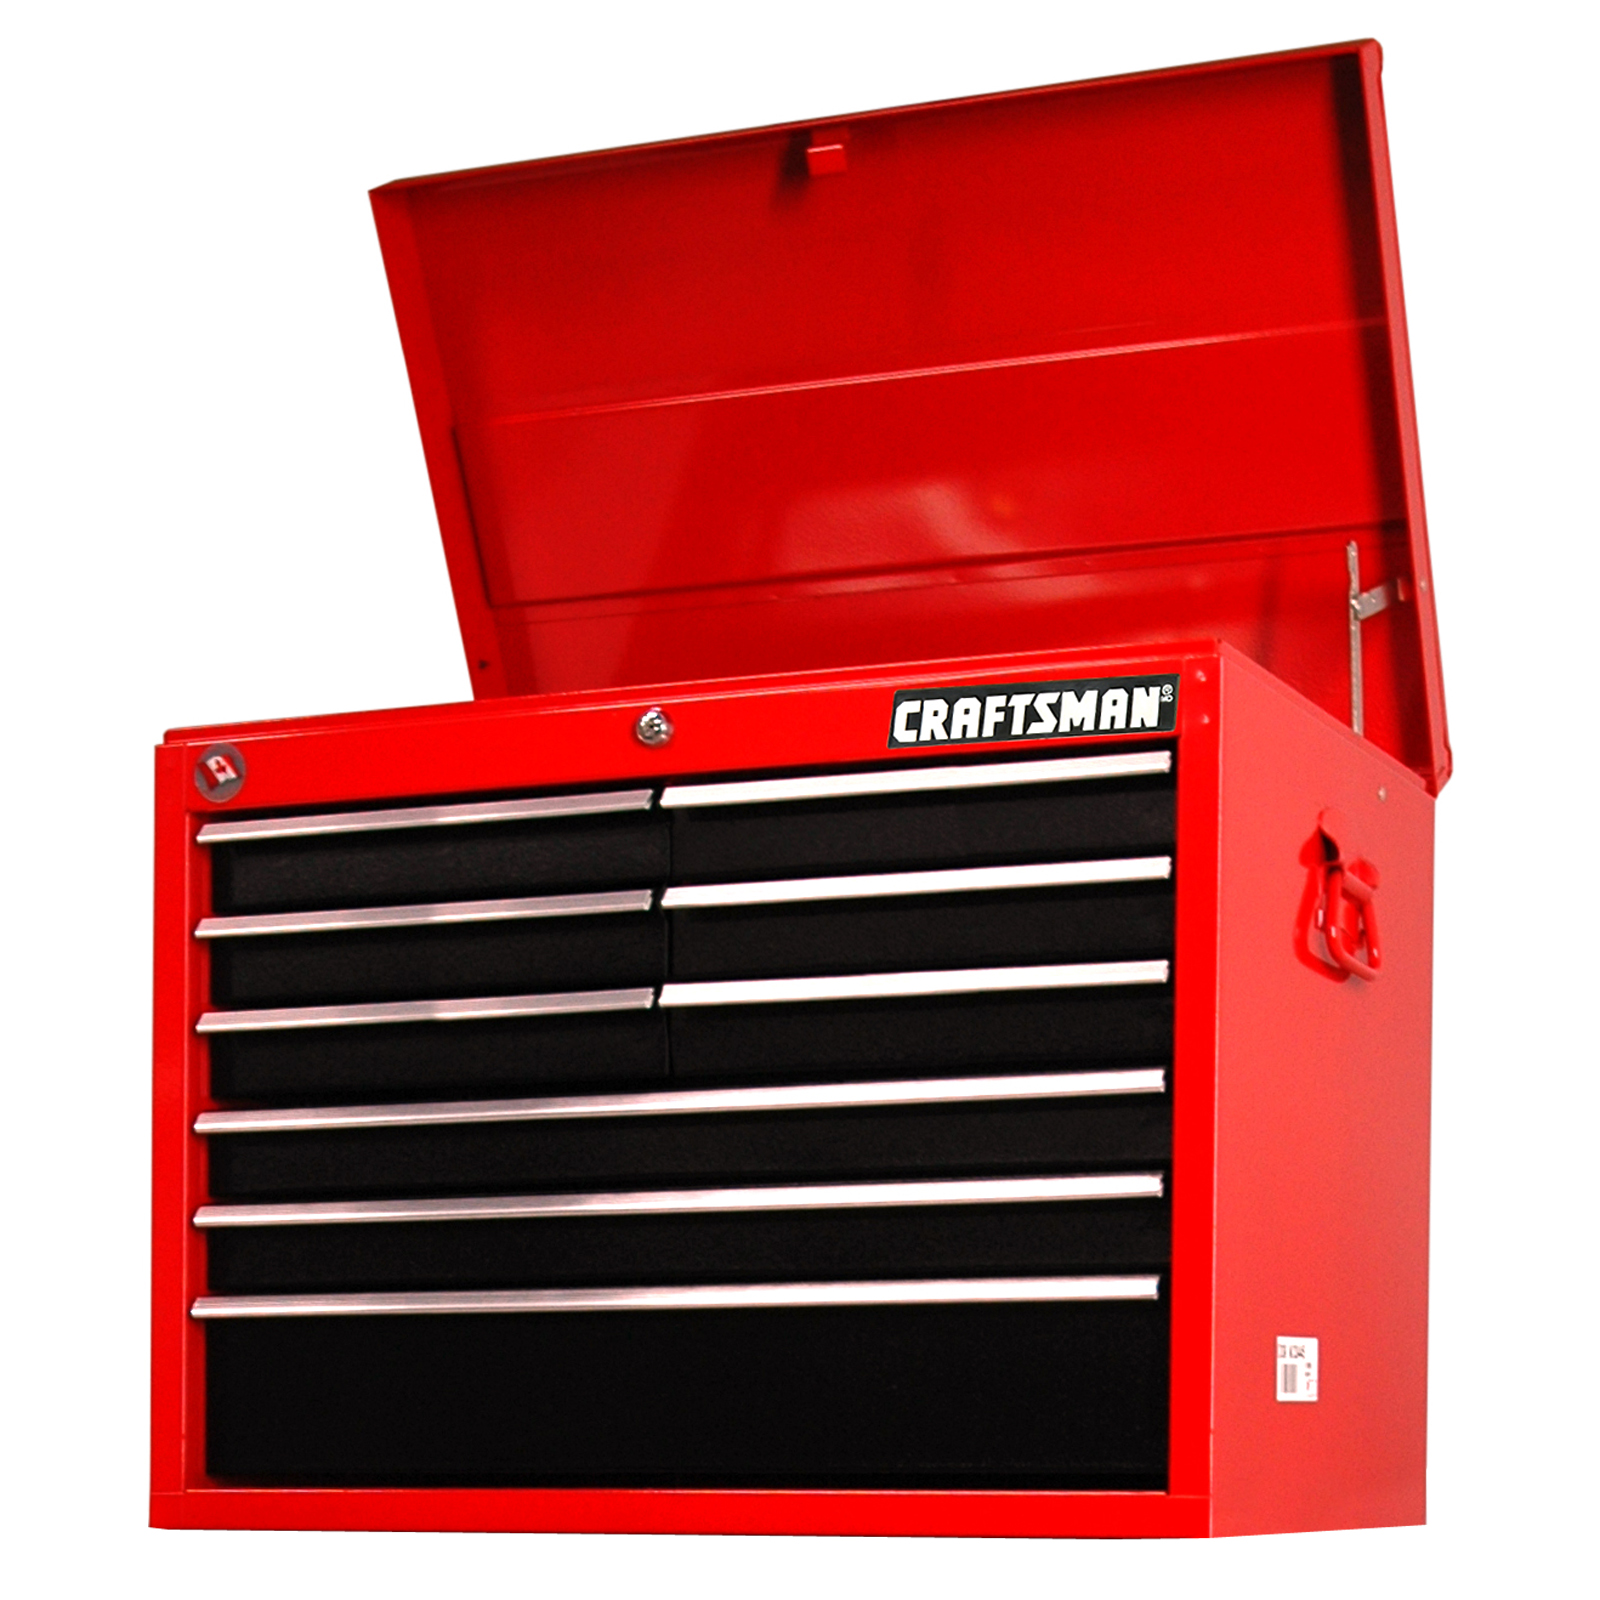 Craftsman 27 9 Drawer Top Chest Red And Black Shop Your Way Online